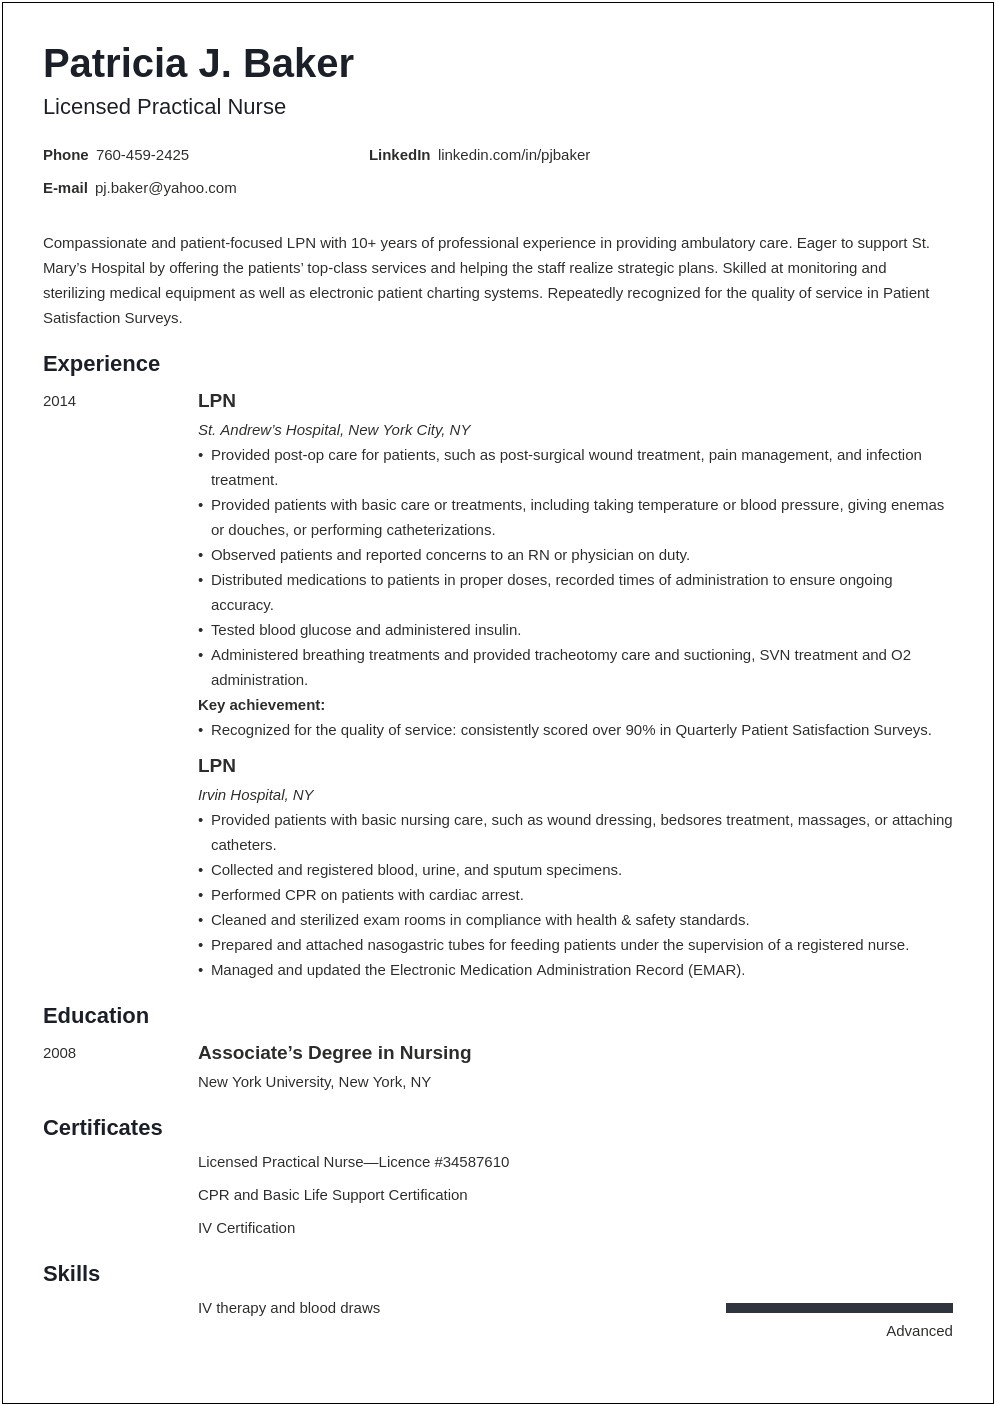 Resume Objective For An Lpn